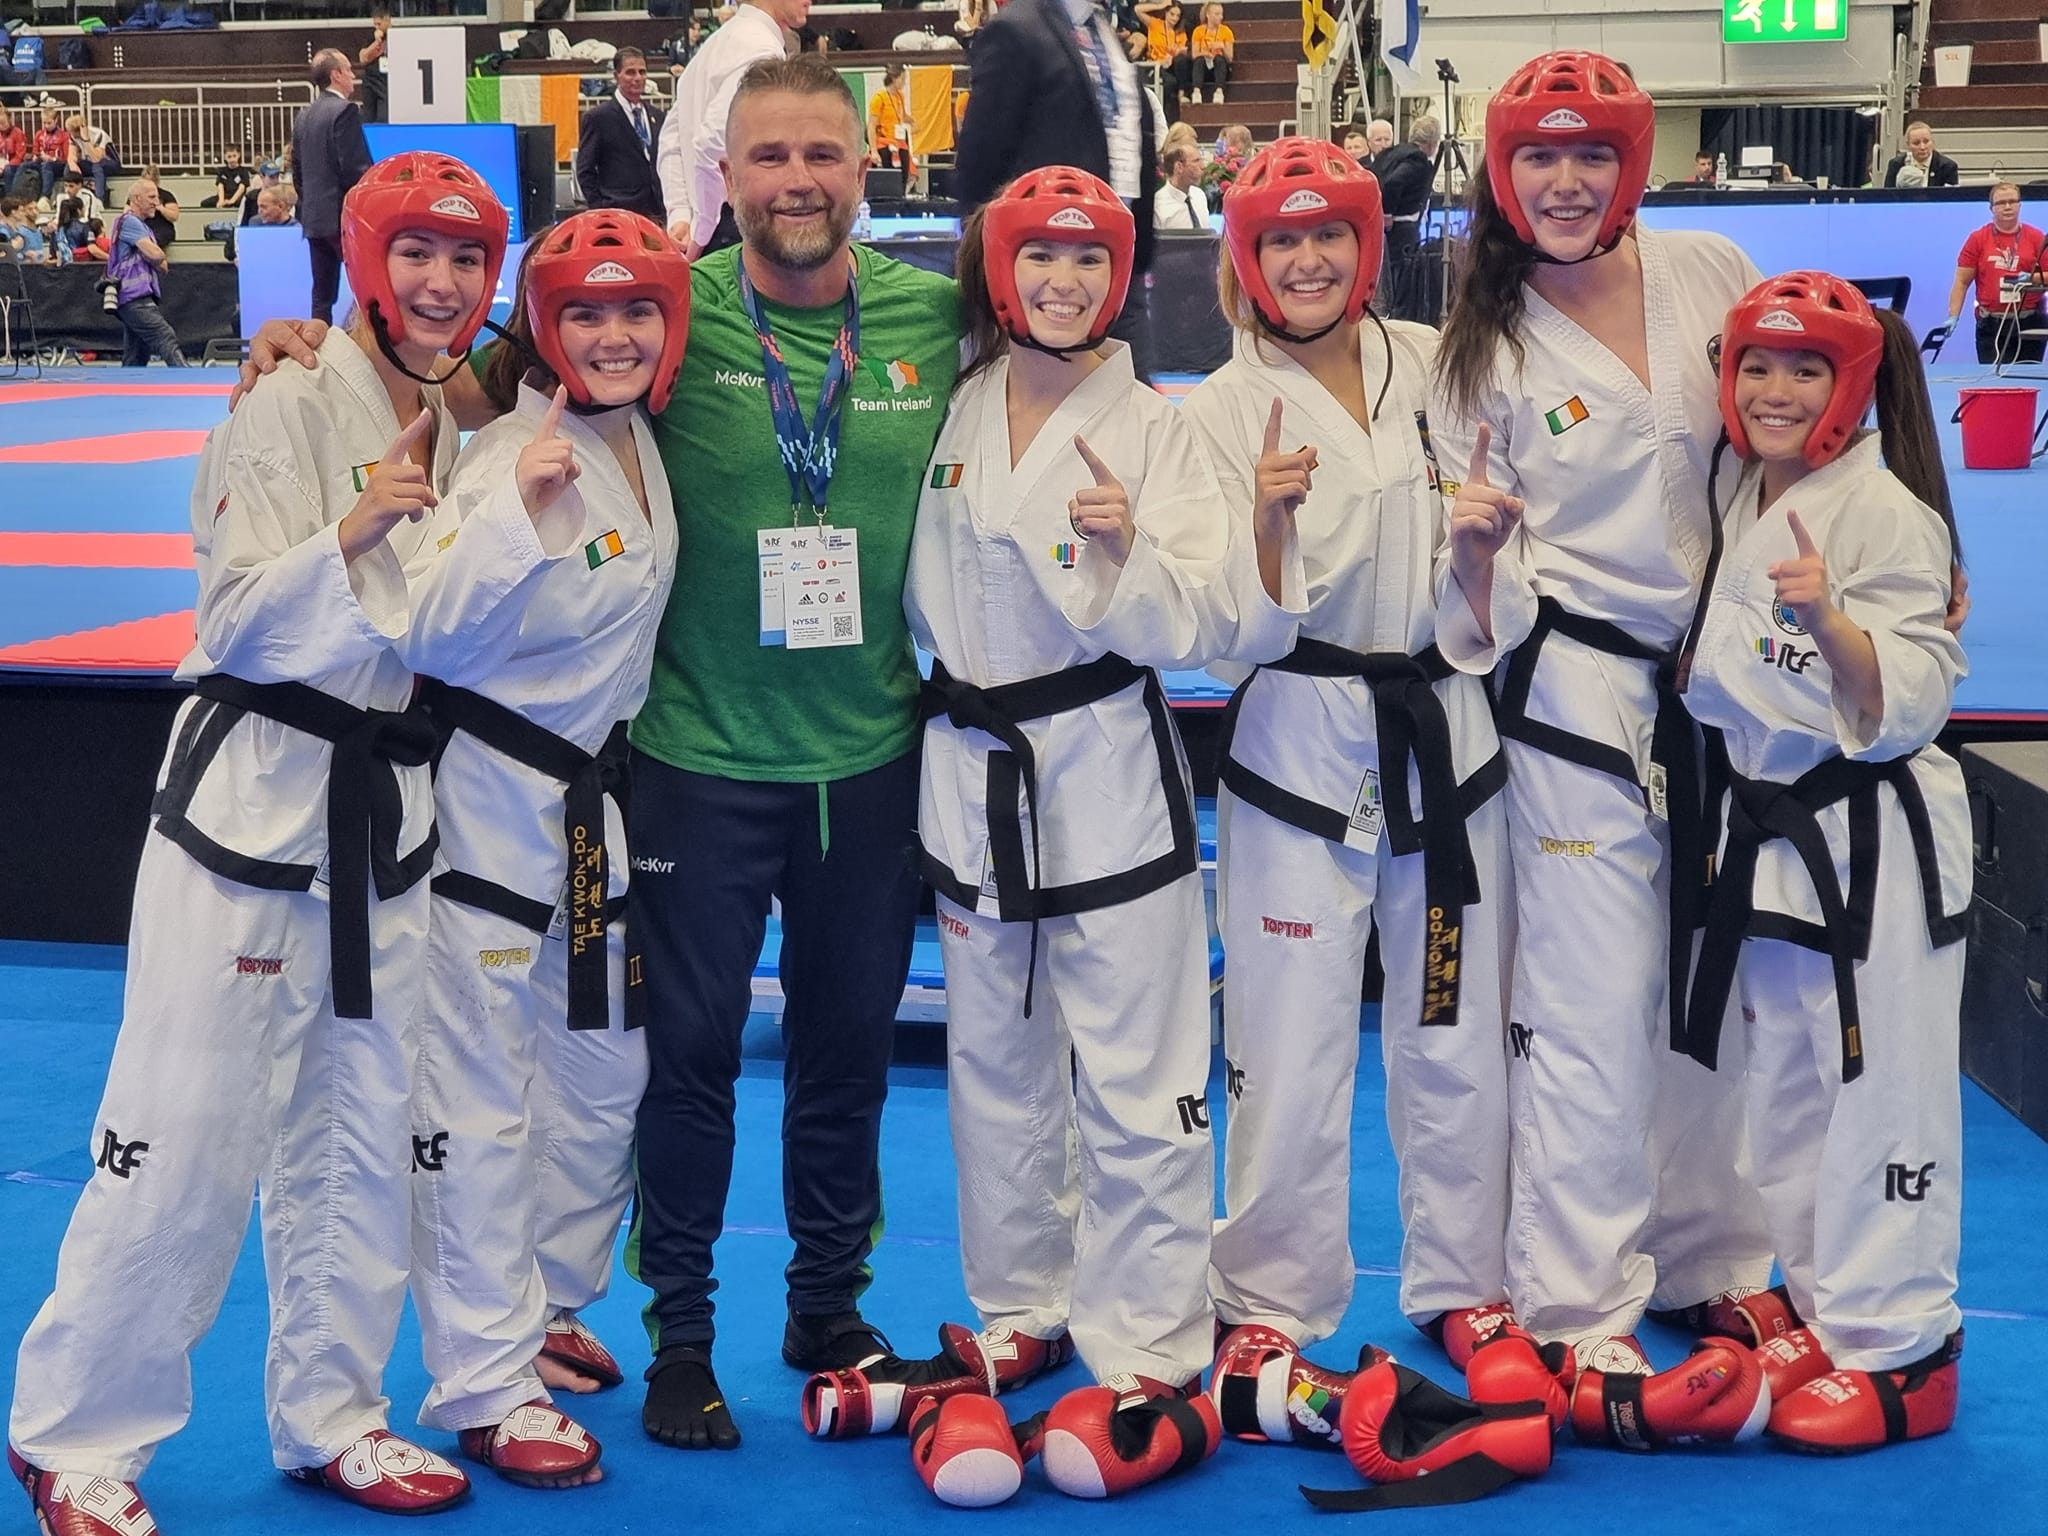 Success for Ireland including in the women's team sparring ensured they finished second on the medals table with five golds ©Irish Taekwon-Do Association